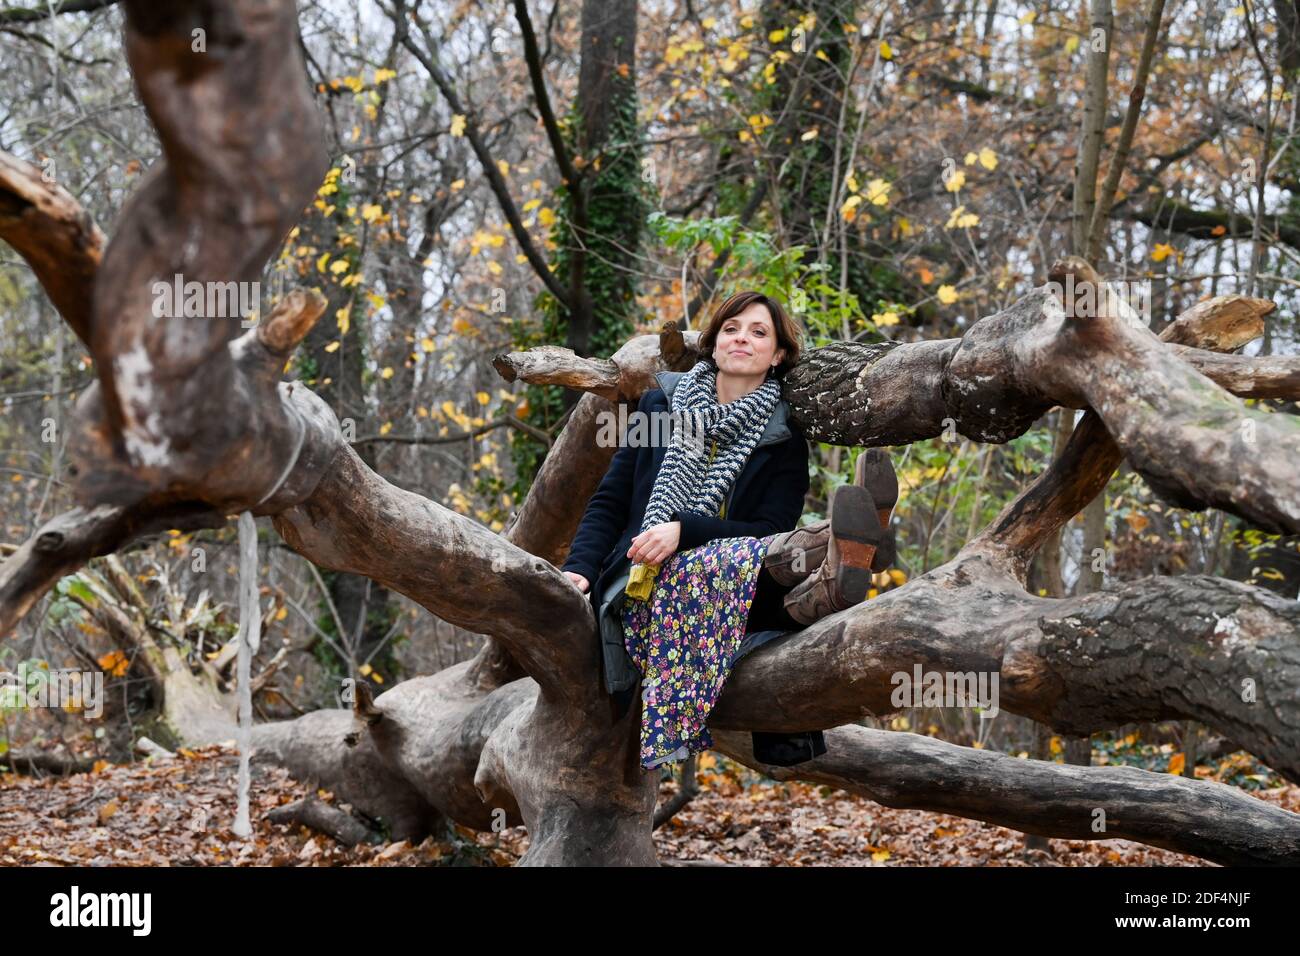 Berlin, Germany. 30th Nov, 2020. The actress Julia Brendler during a walk in the park Schönholzer Heide in Niederschönhausen She plays the leading role in the film of the ZDF series 'Katie Fforde: Emma's Secret', which will be broadcast on 06.12.2020 at 20.15. She is also known from the ZDF crime series 'Nord Nord Mord'. Credit: Jens Kalaene/dpa-Zentralbild/ZB/dpa/Alamy Live News Stock Photo